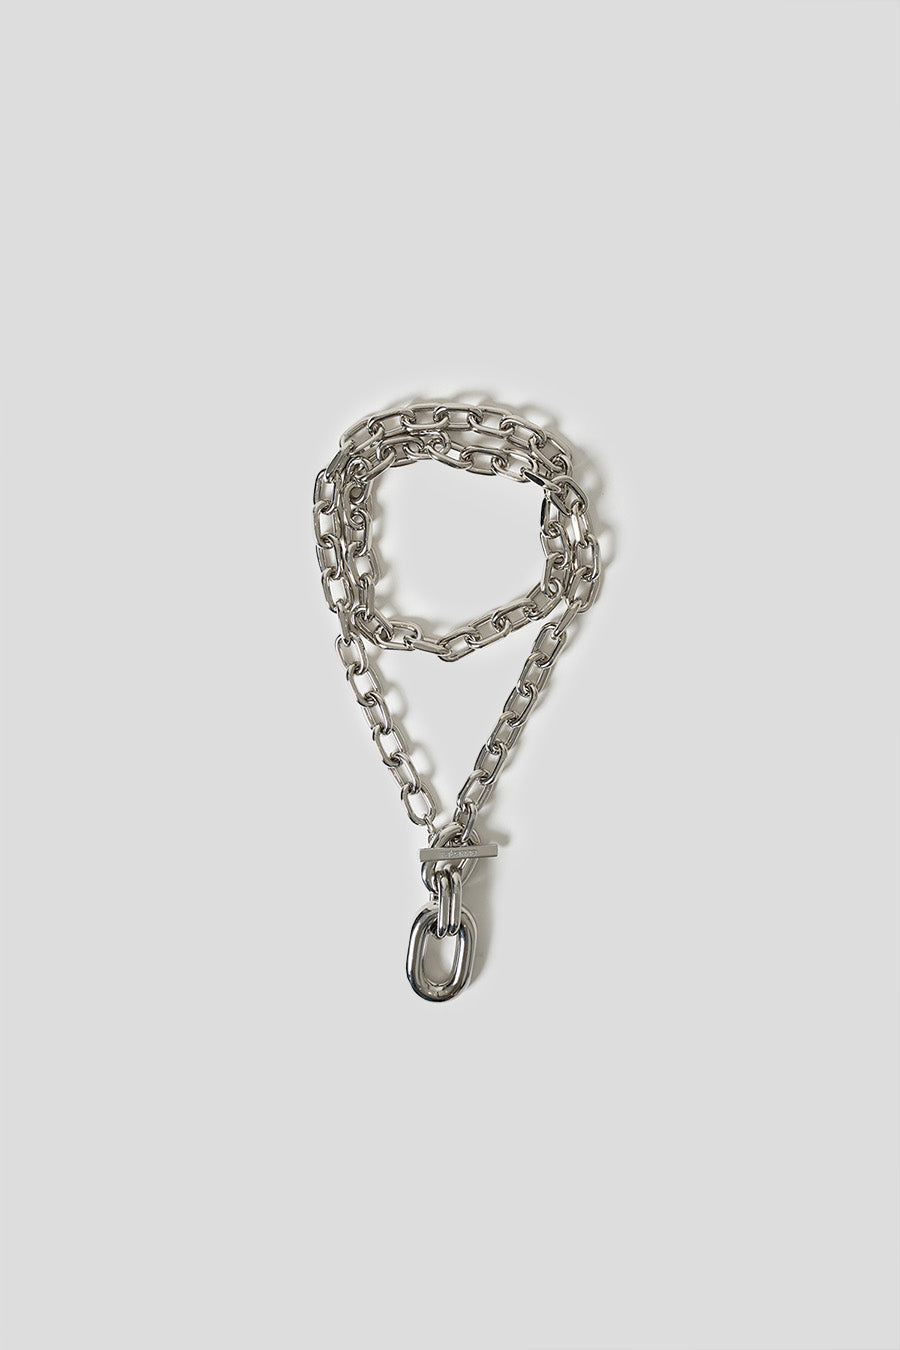 Rabanne - SILVER XL LINK NECKLACE WITH PENDANT - LE LABO STORE